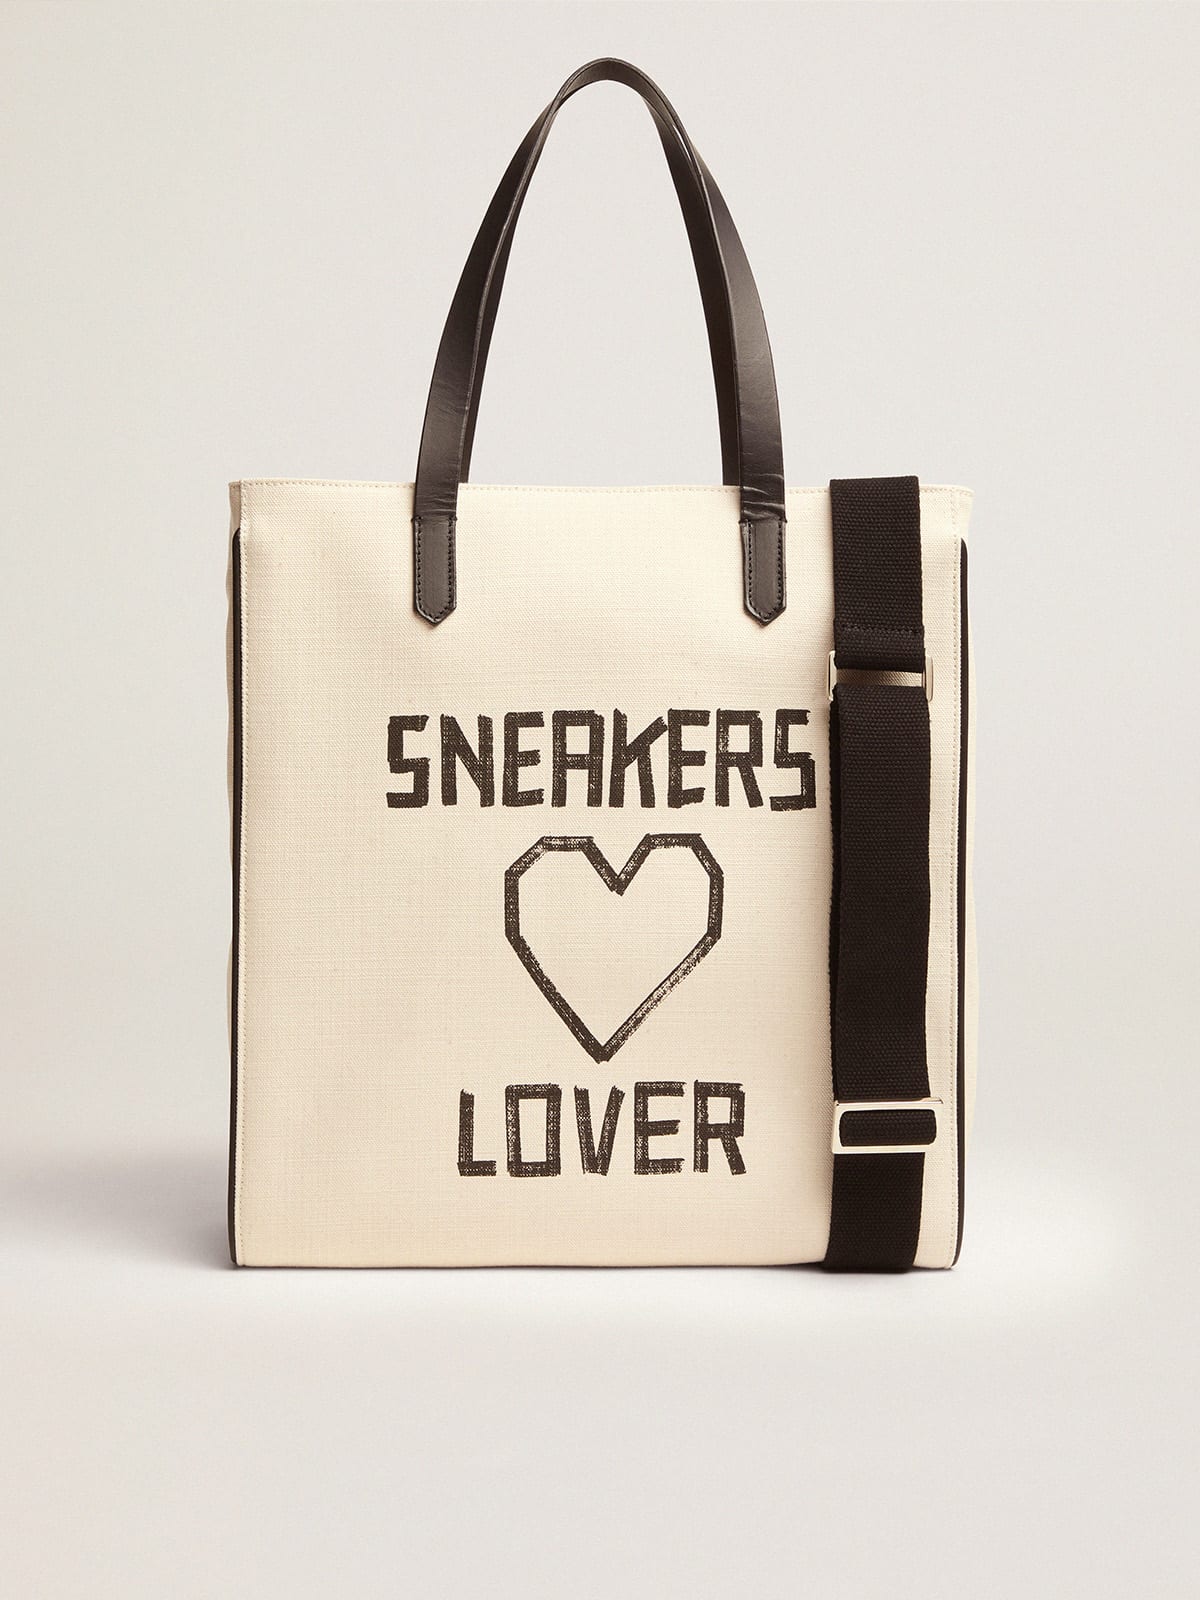 Golden Goose - "Sneakers Lovers" North-South California Bag in 